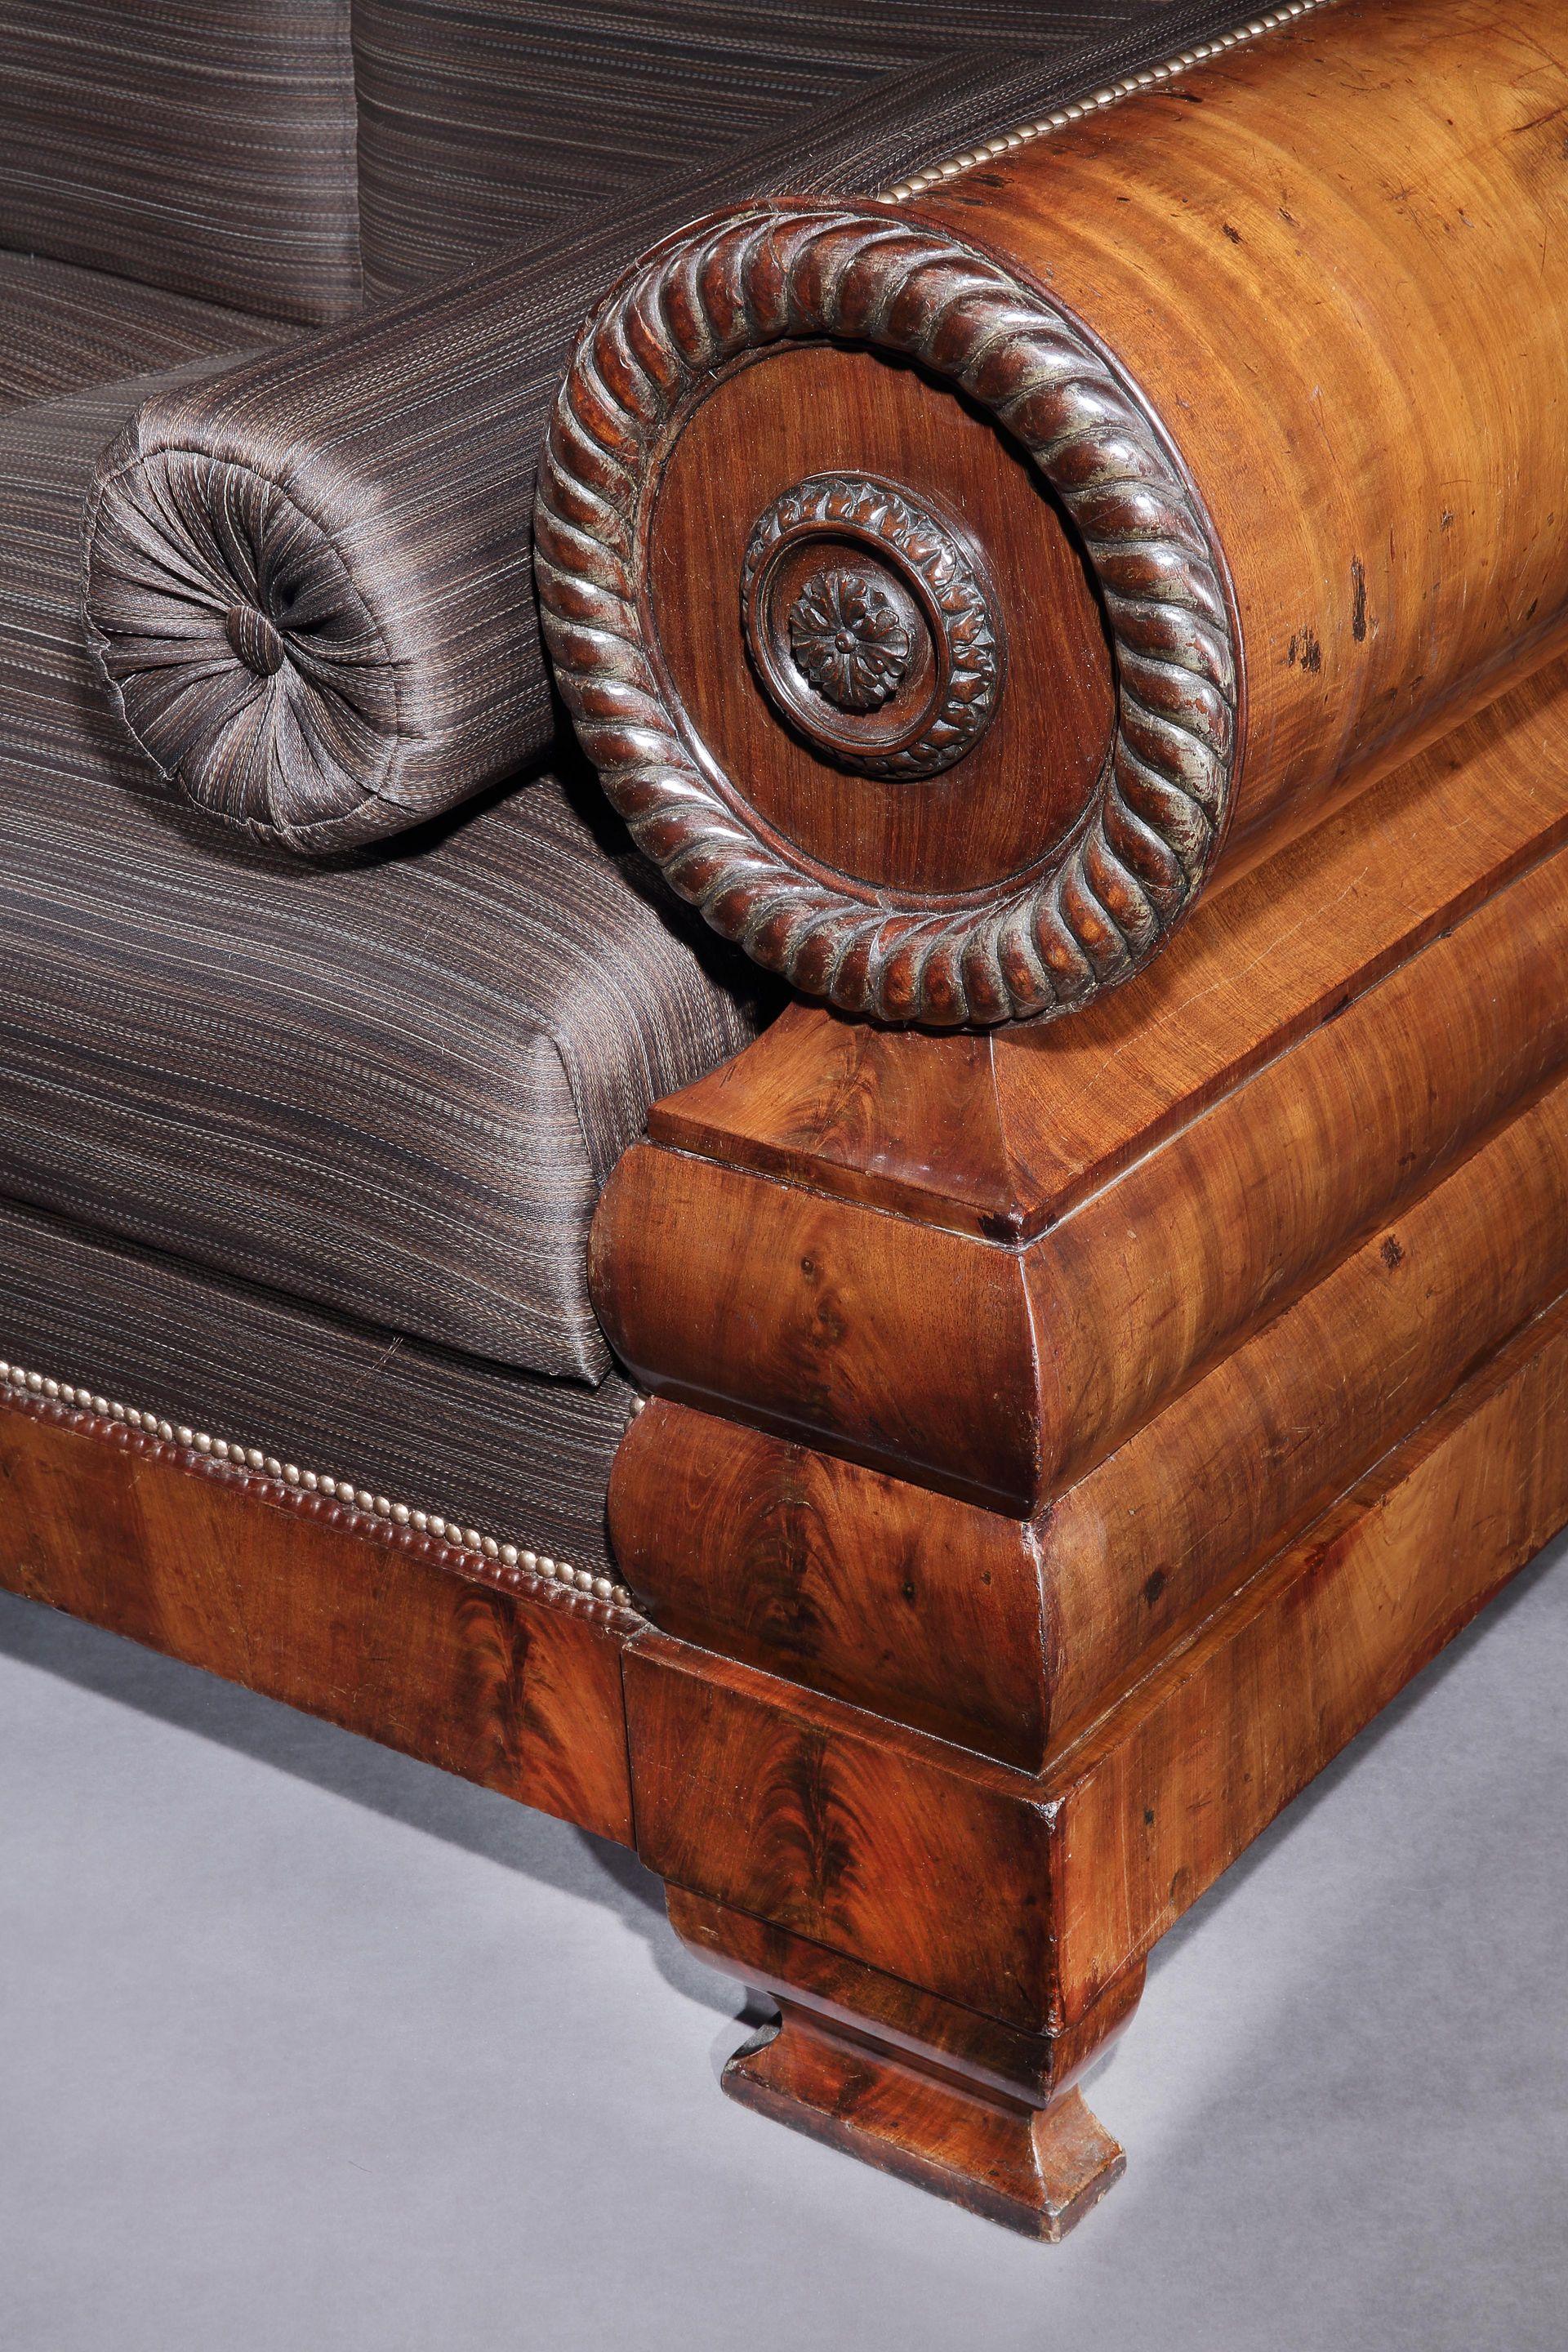 This handsome settee is in rare original condition retaining all the original timber and horsehair stuffings. The form is bold and fluid and the carved ornament very well executed. The carpenter has used veneers with exceptional graining which are a